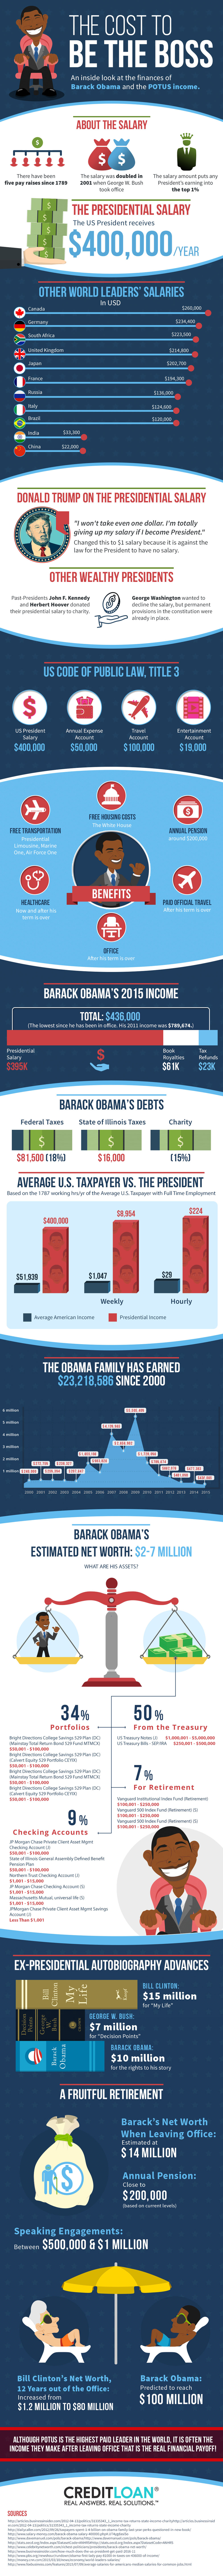 Launch full infographic: Where Obama Gets His Money